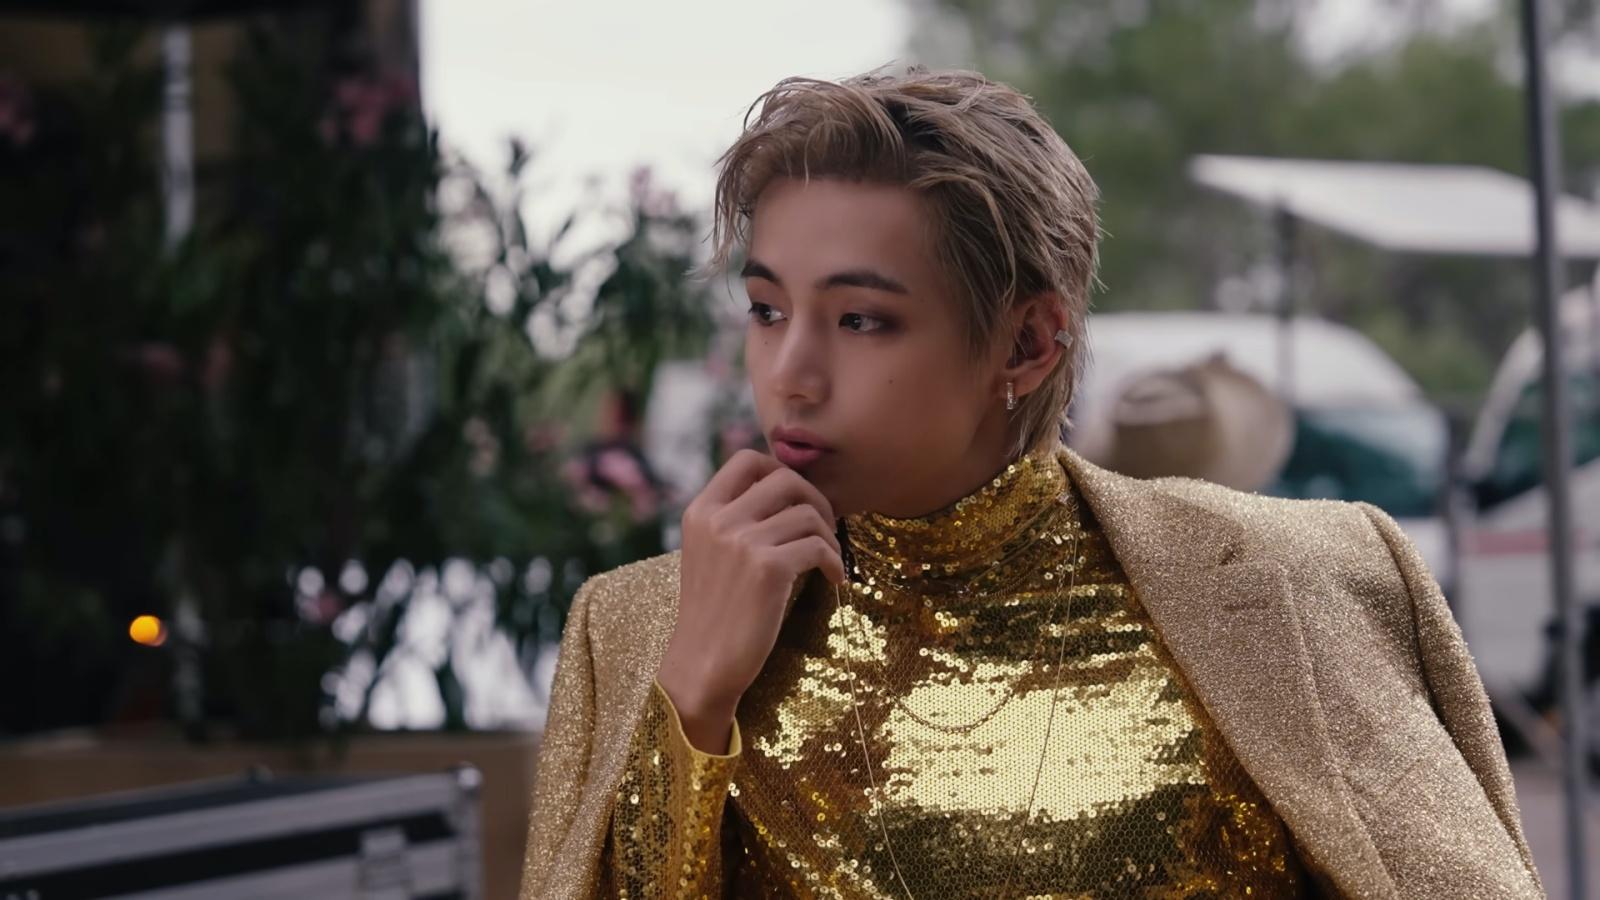 BTS' V sitting in a chair and wearing a gold outfit